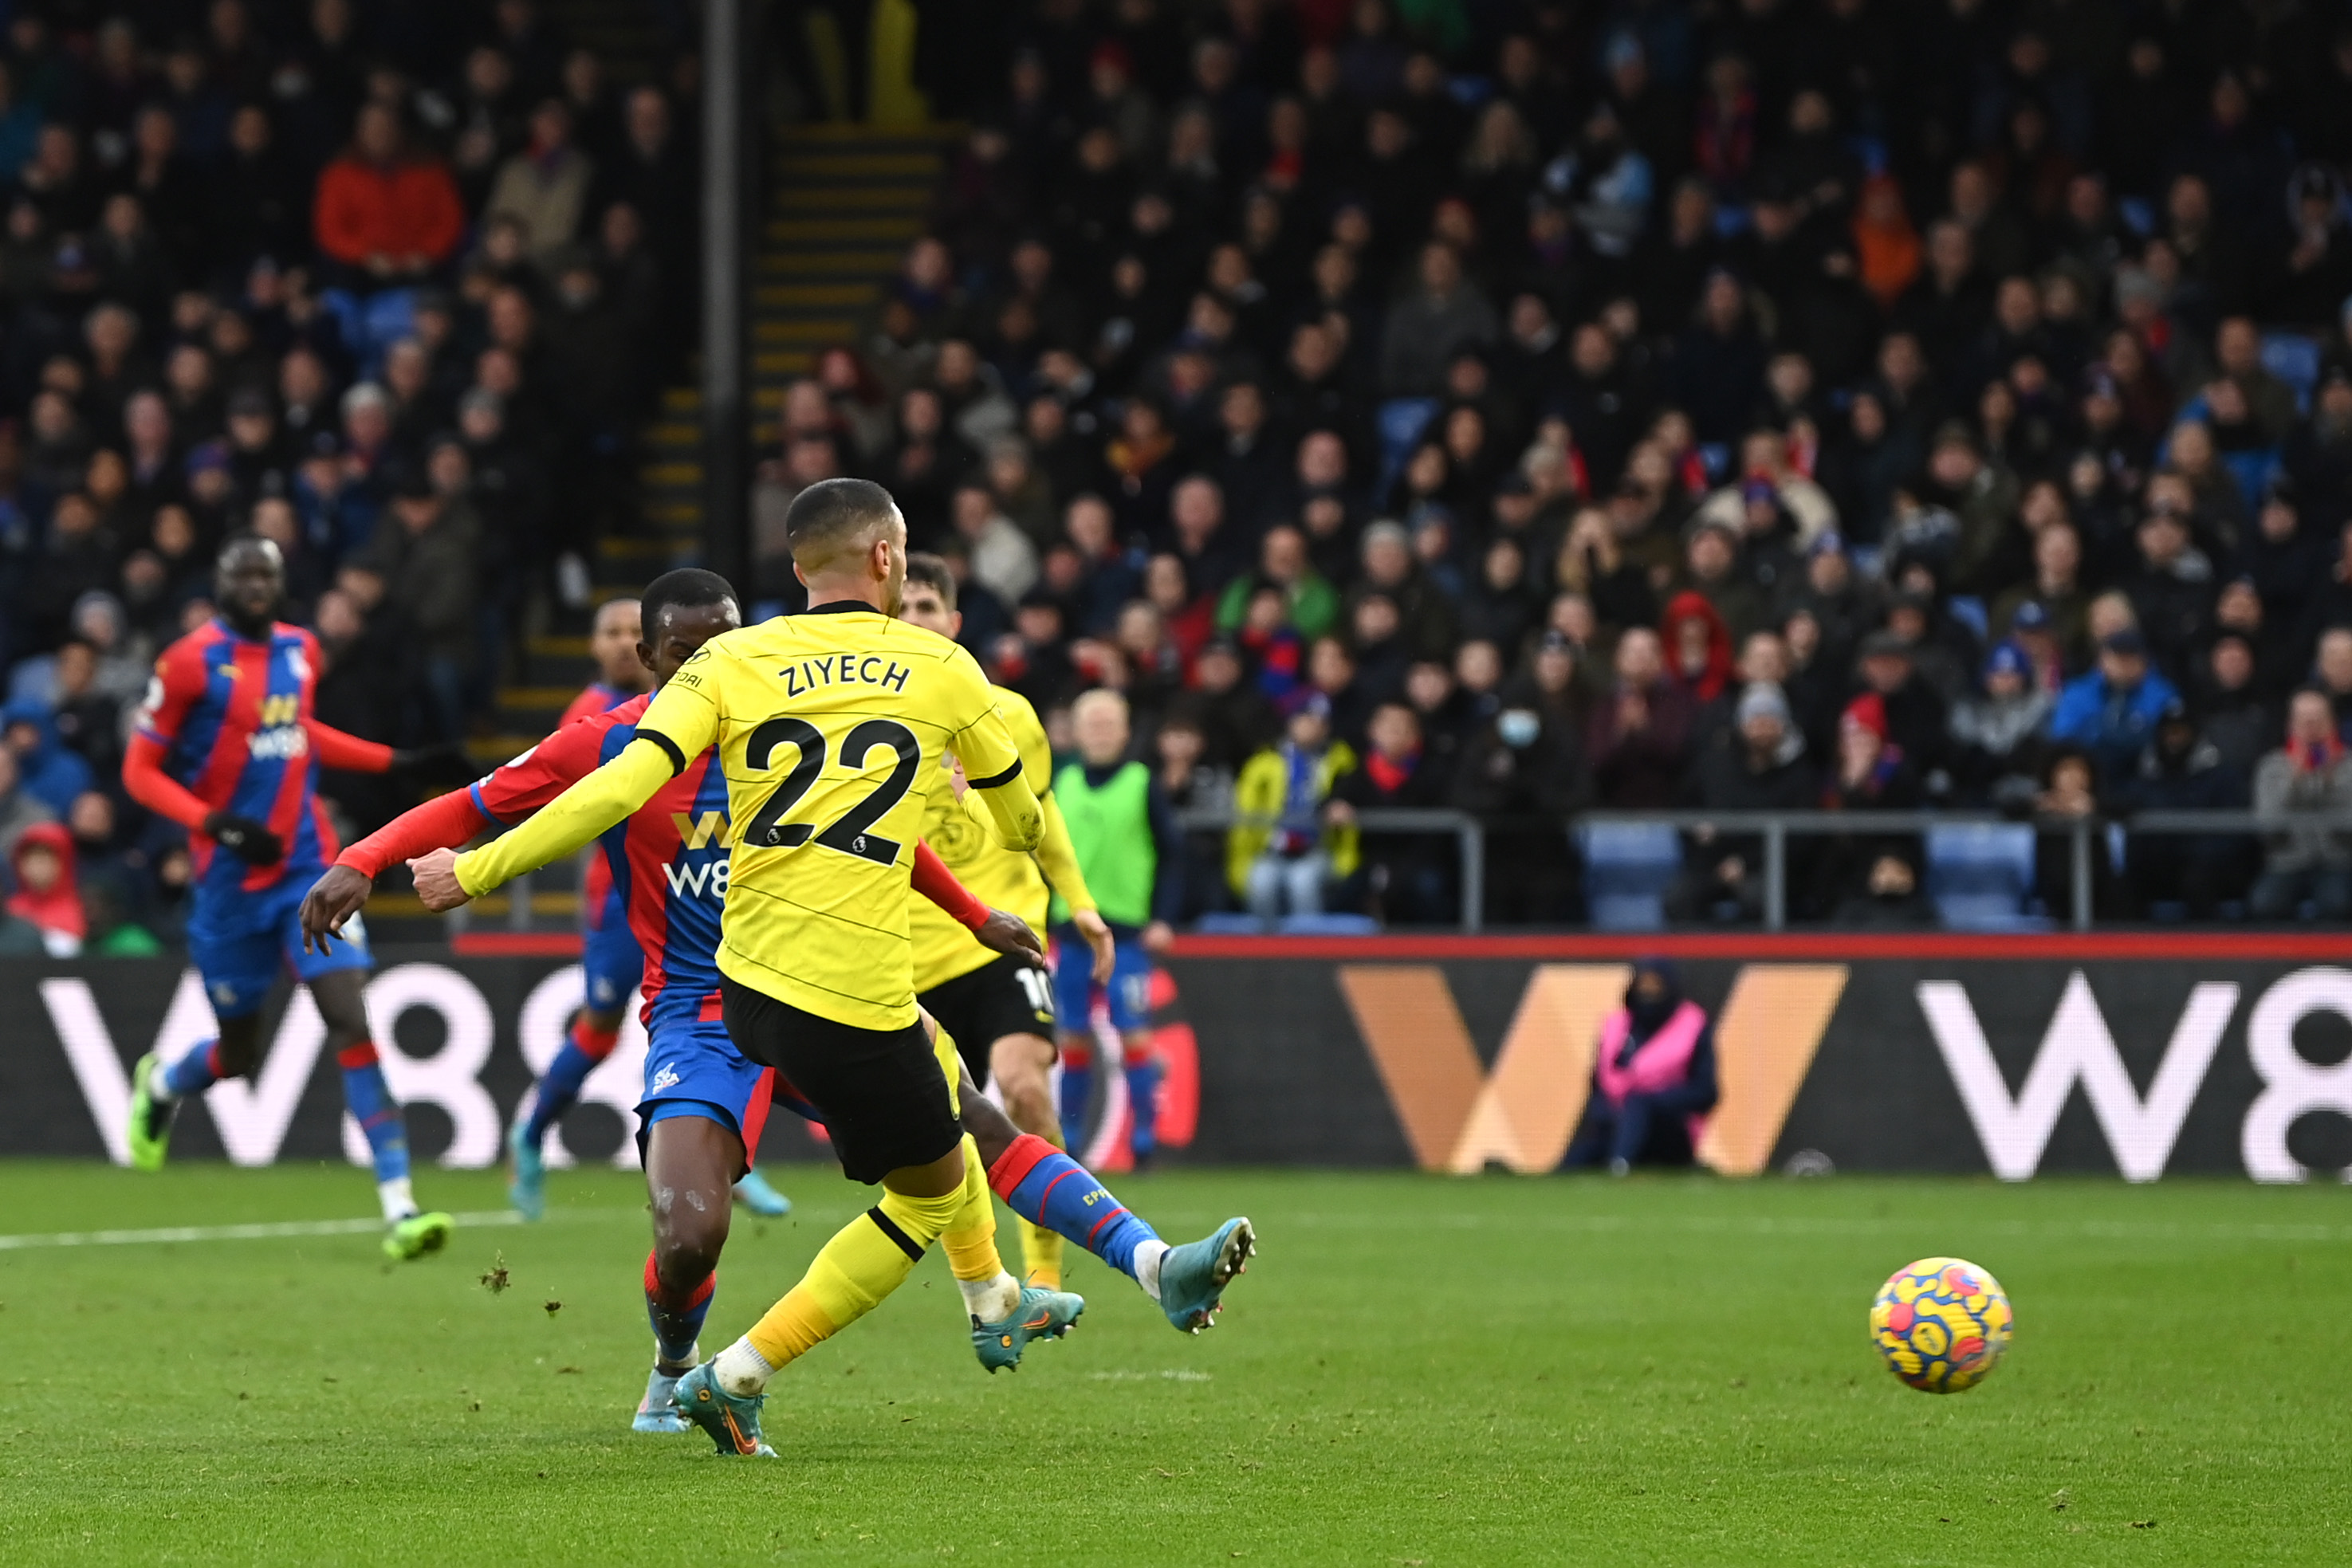 Crystal Palace 0-1 Chelsea: Hakim Ziyech scores a late goal at Selhurst Park to defeat Crystal Palace; The Blues hold their third spot firmly